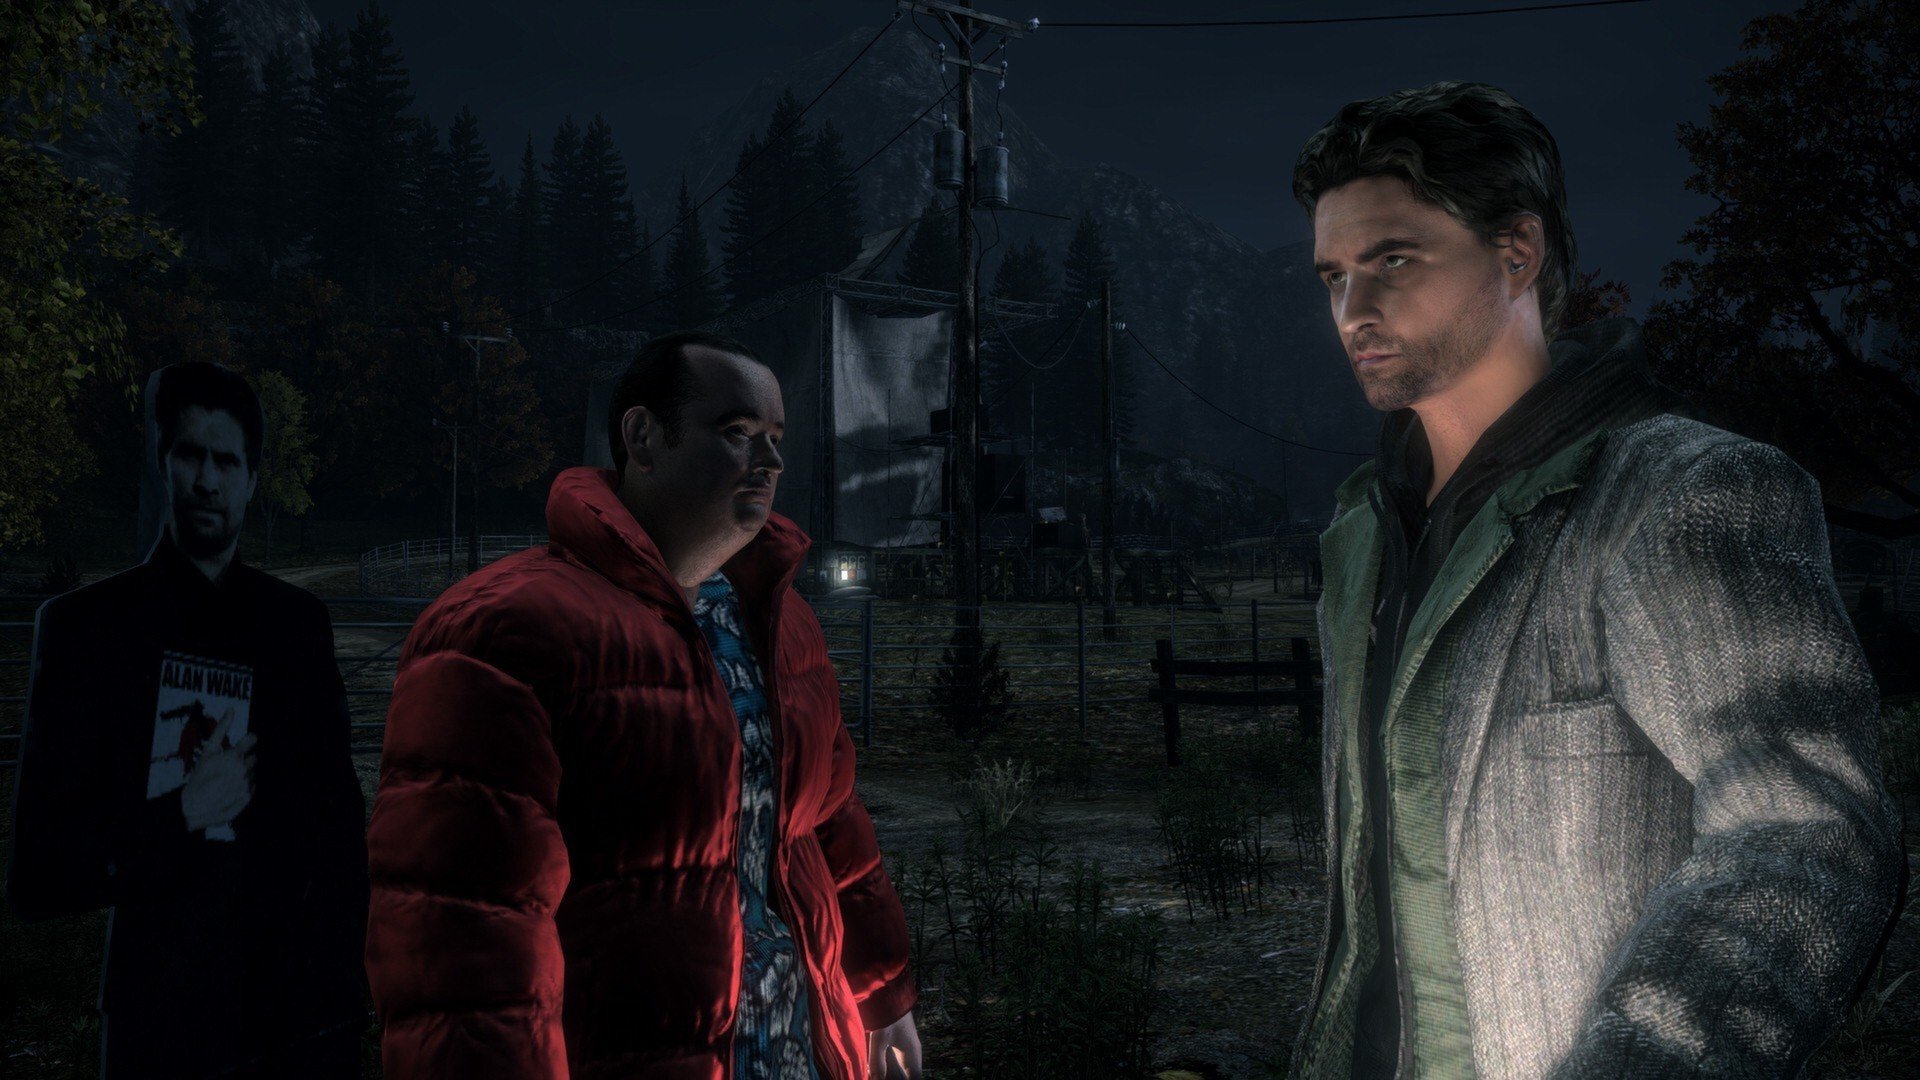 Buy Alan Wake Remastered CD Key Compare Prices